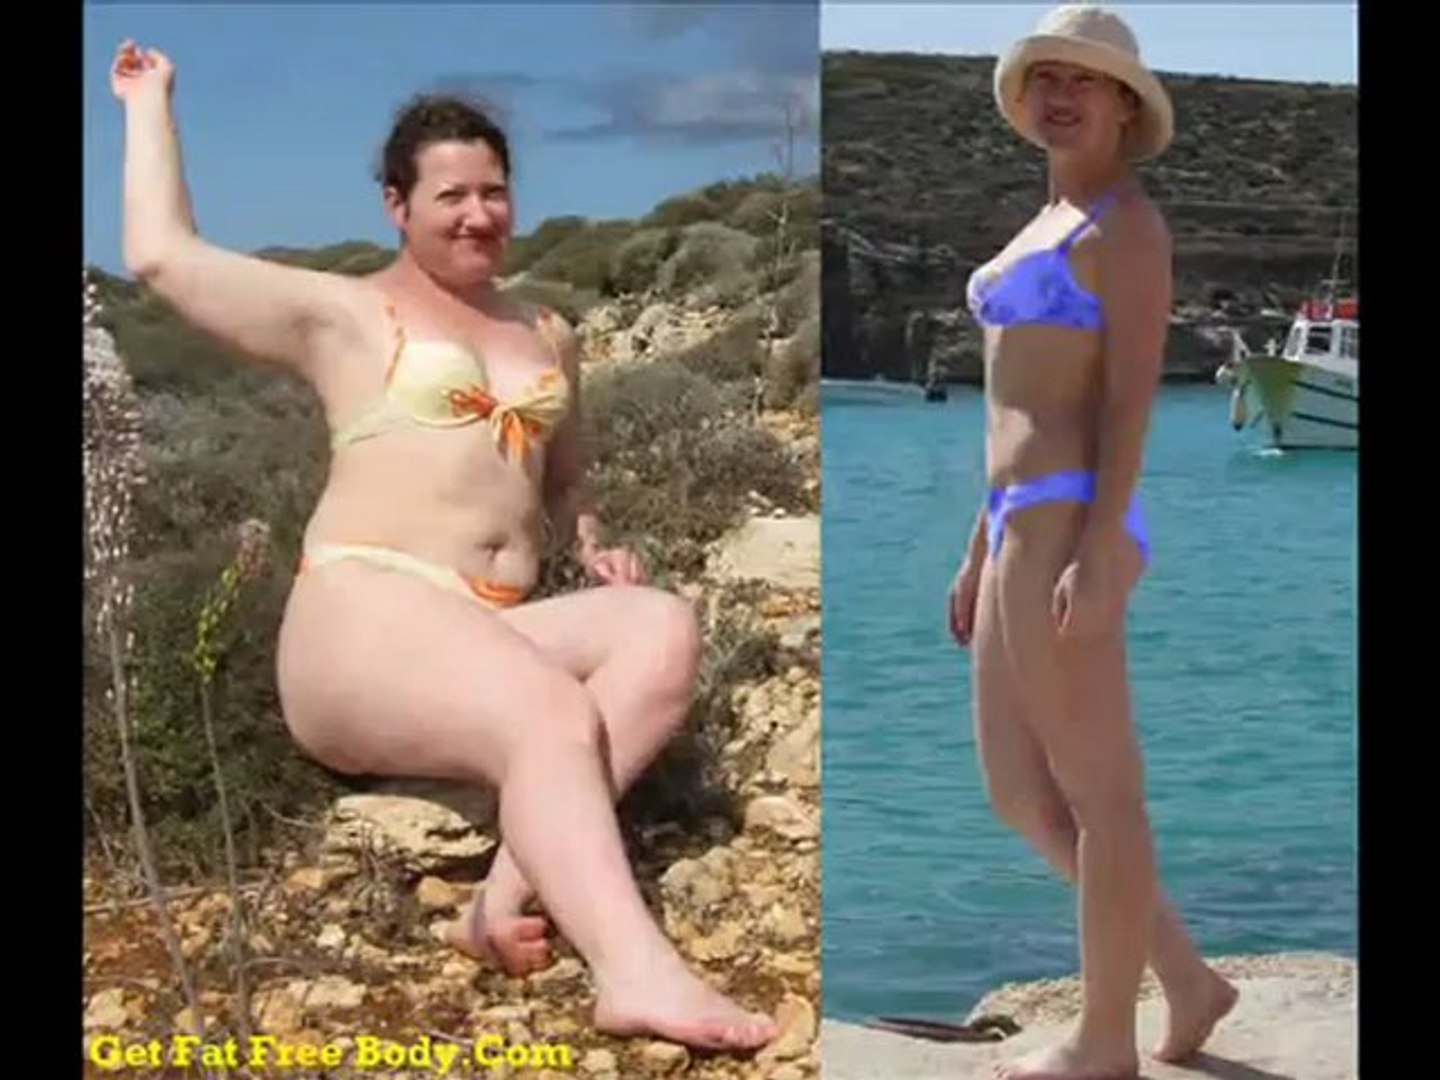 Easy Way to Burn Fat- Ridding Extra Fat Quickly benefits make- pictures makeup- muscle wg weight cid